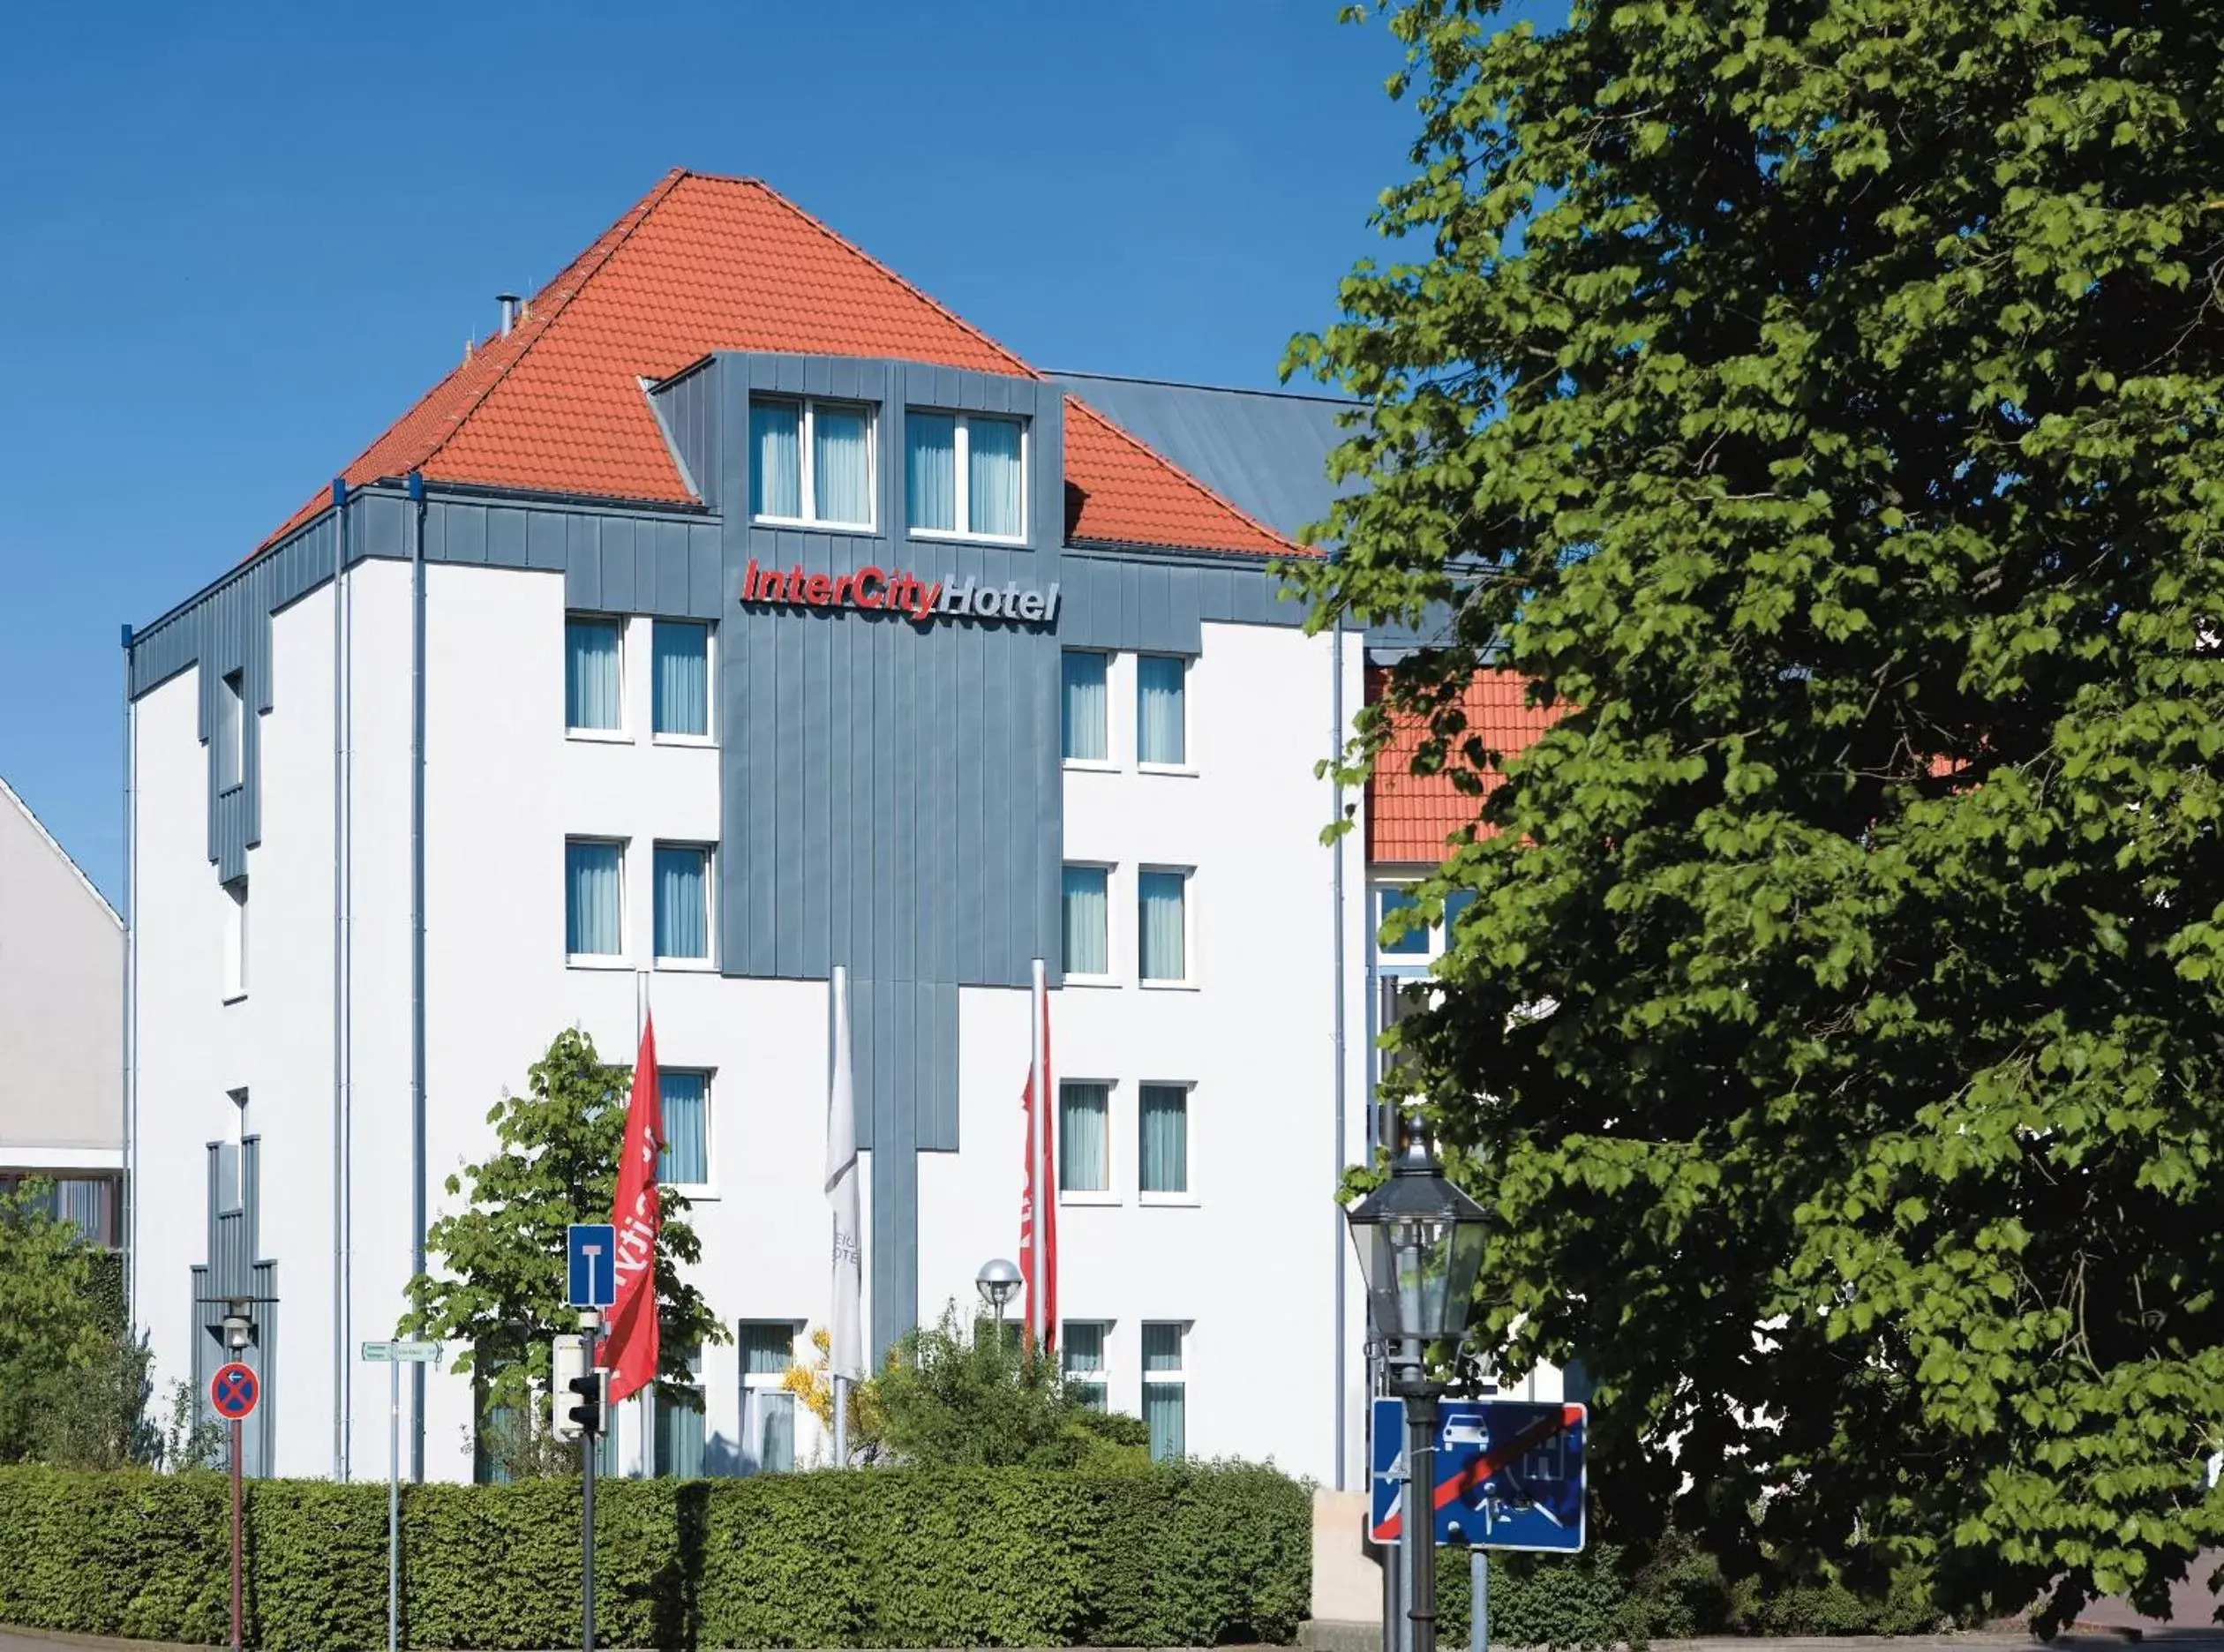 Property building in IntercityHotel Celle